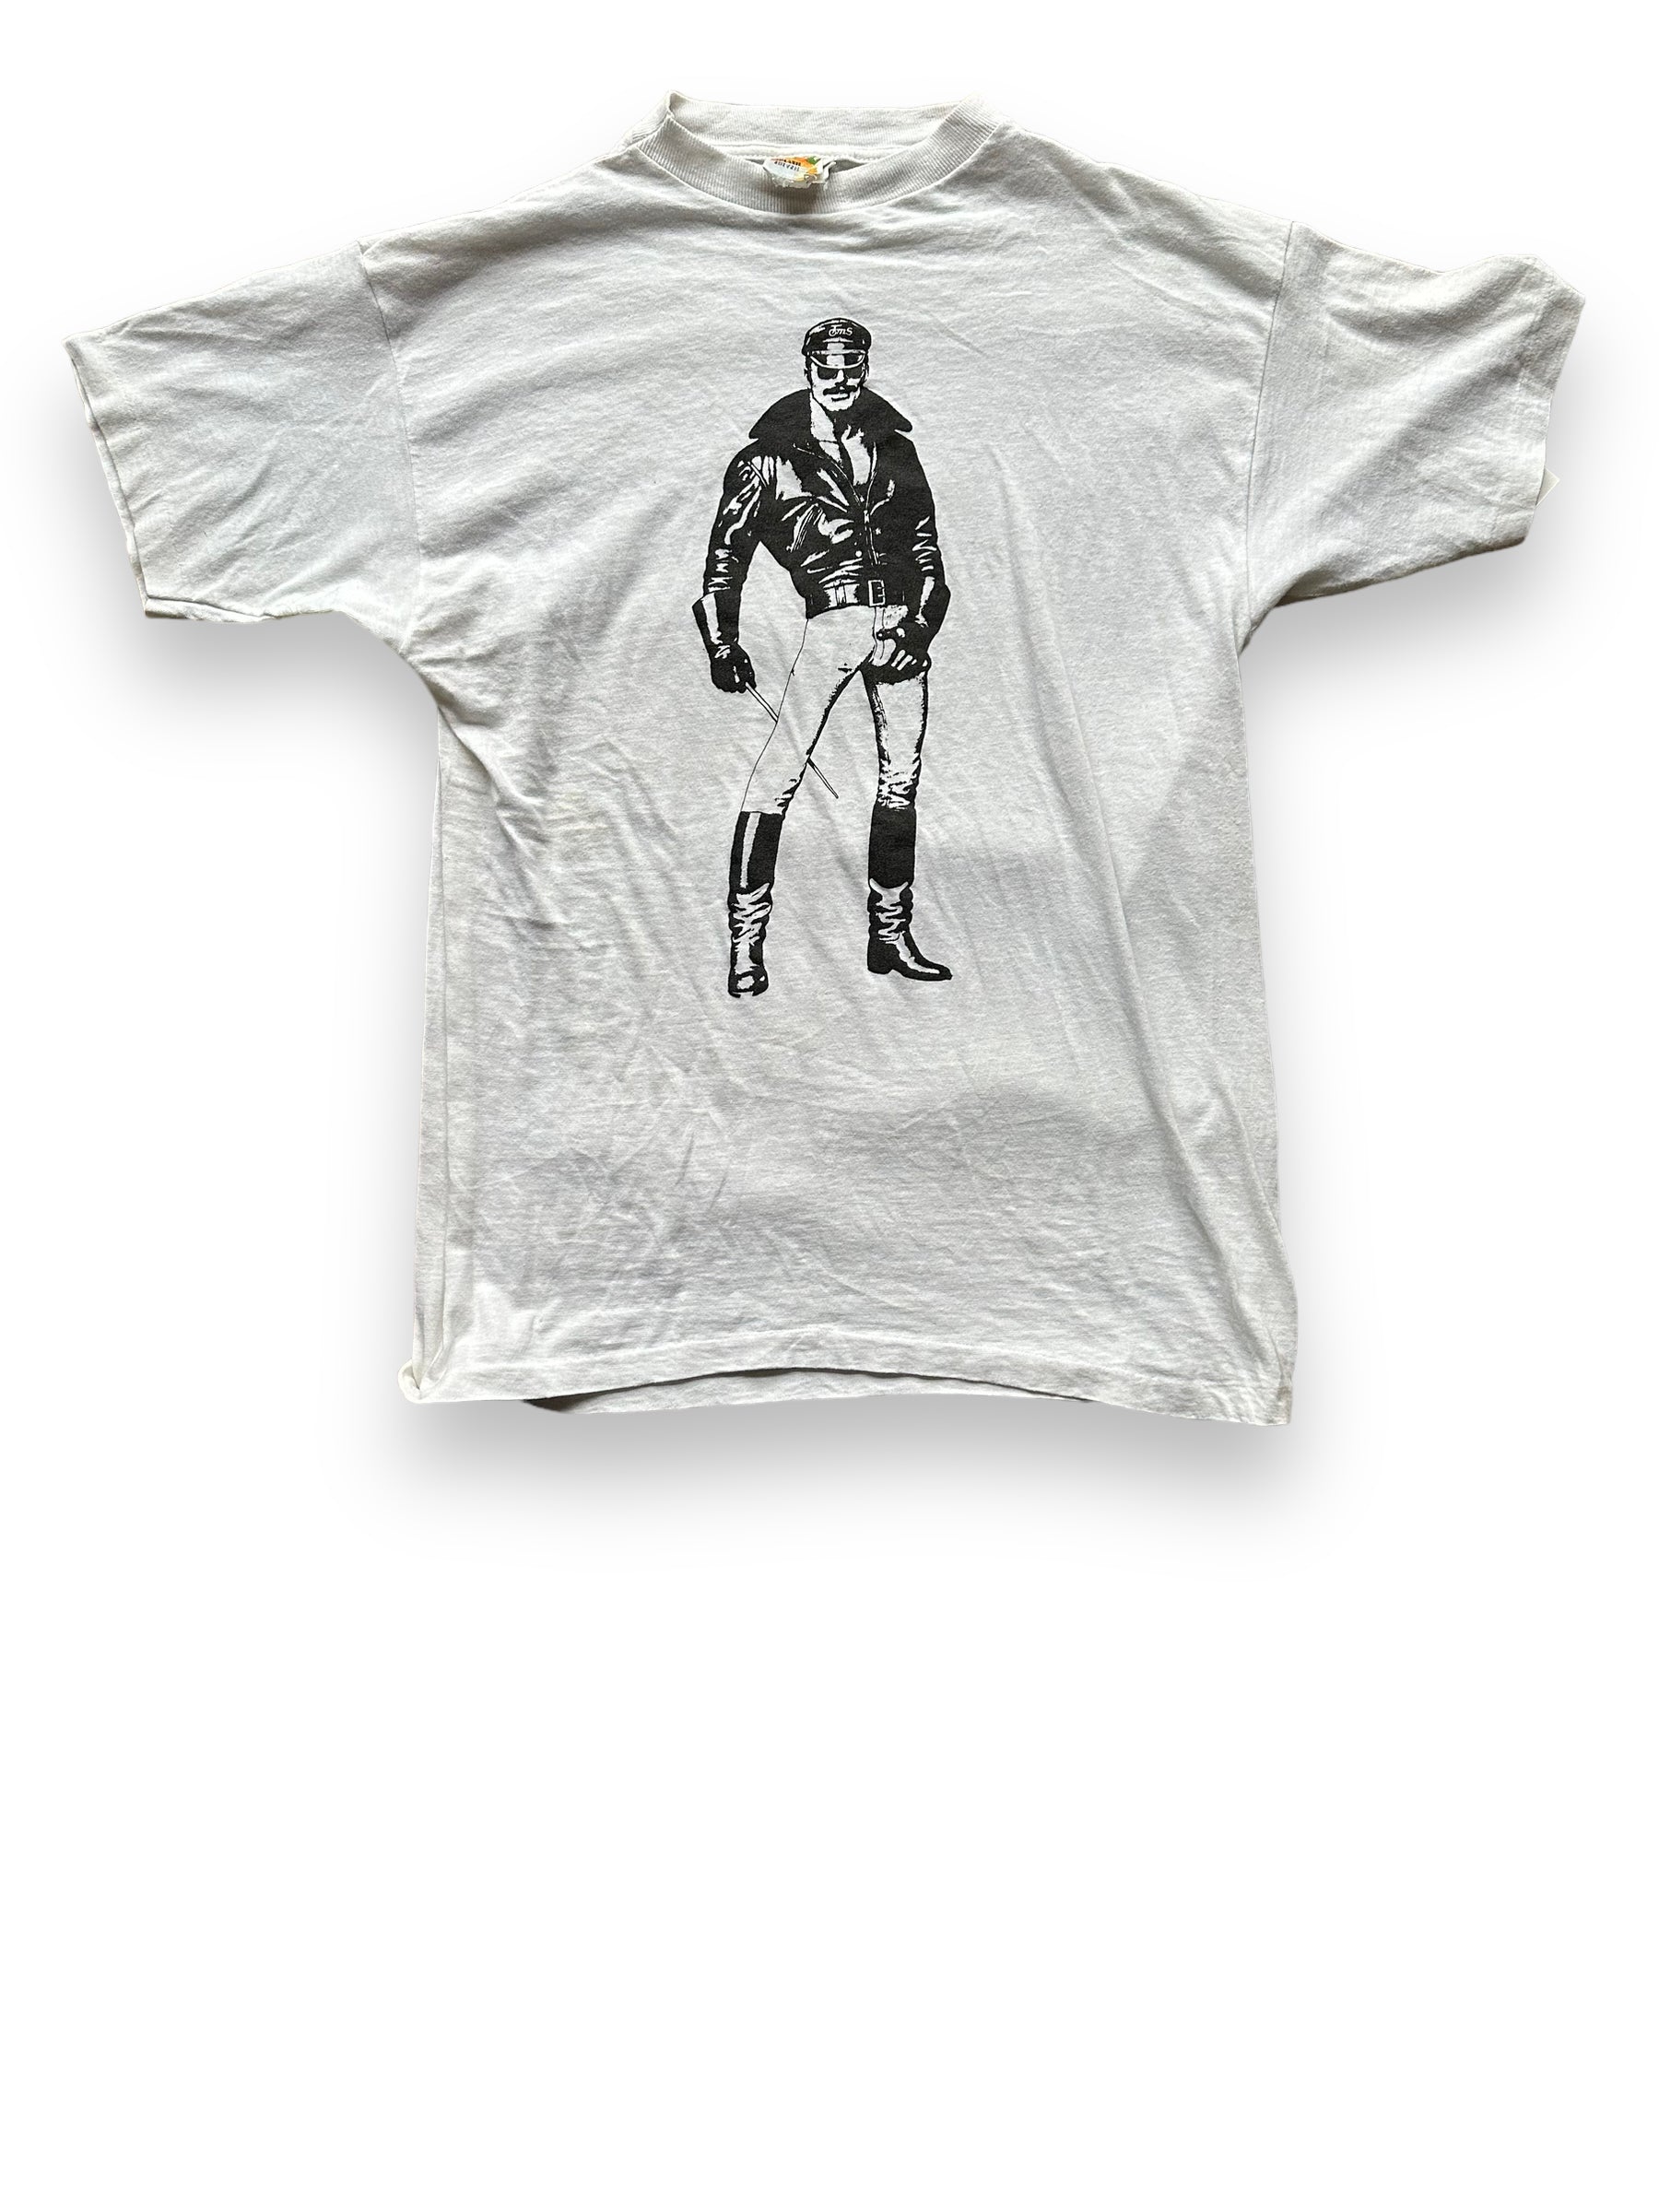 Front View of Vintage Tom of Finland Tee SZ L | Vintage Leather Daddy Tees Tees Seattle | Barn Owl Vintage Tees Seattle